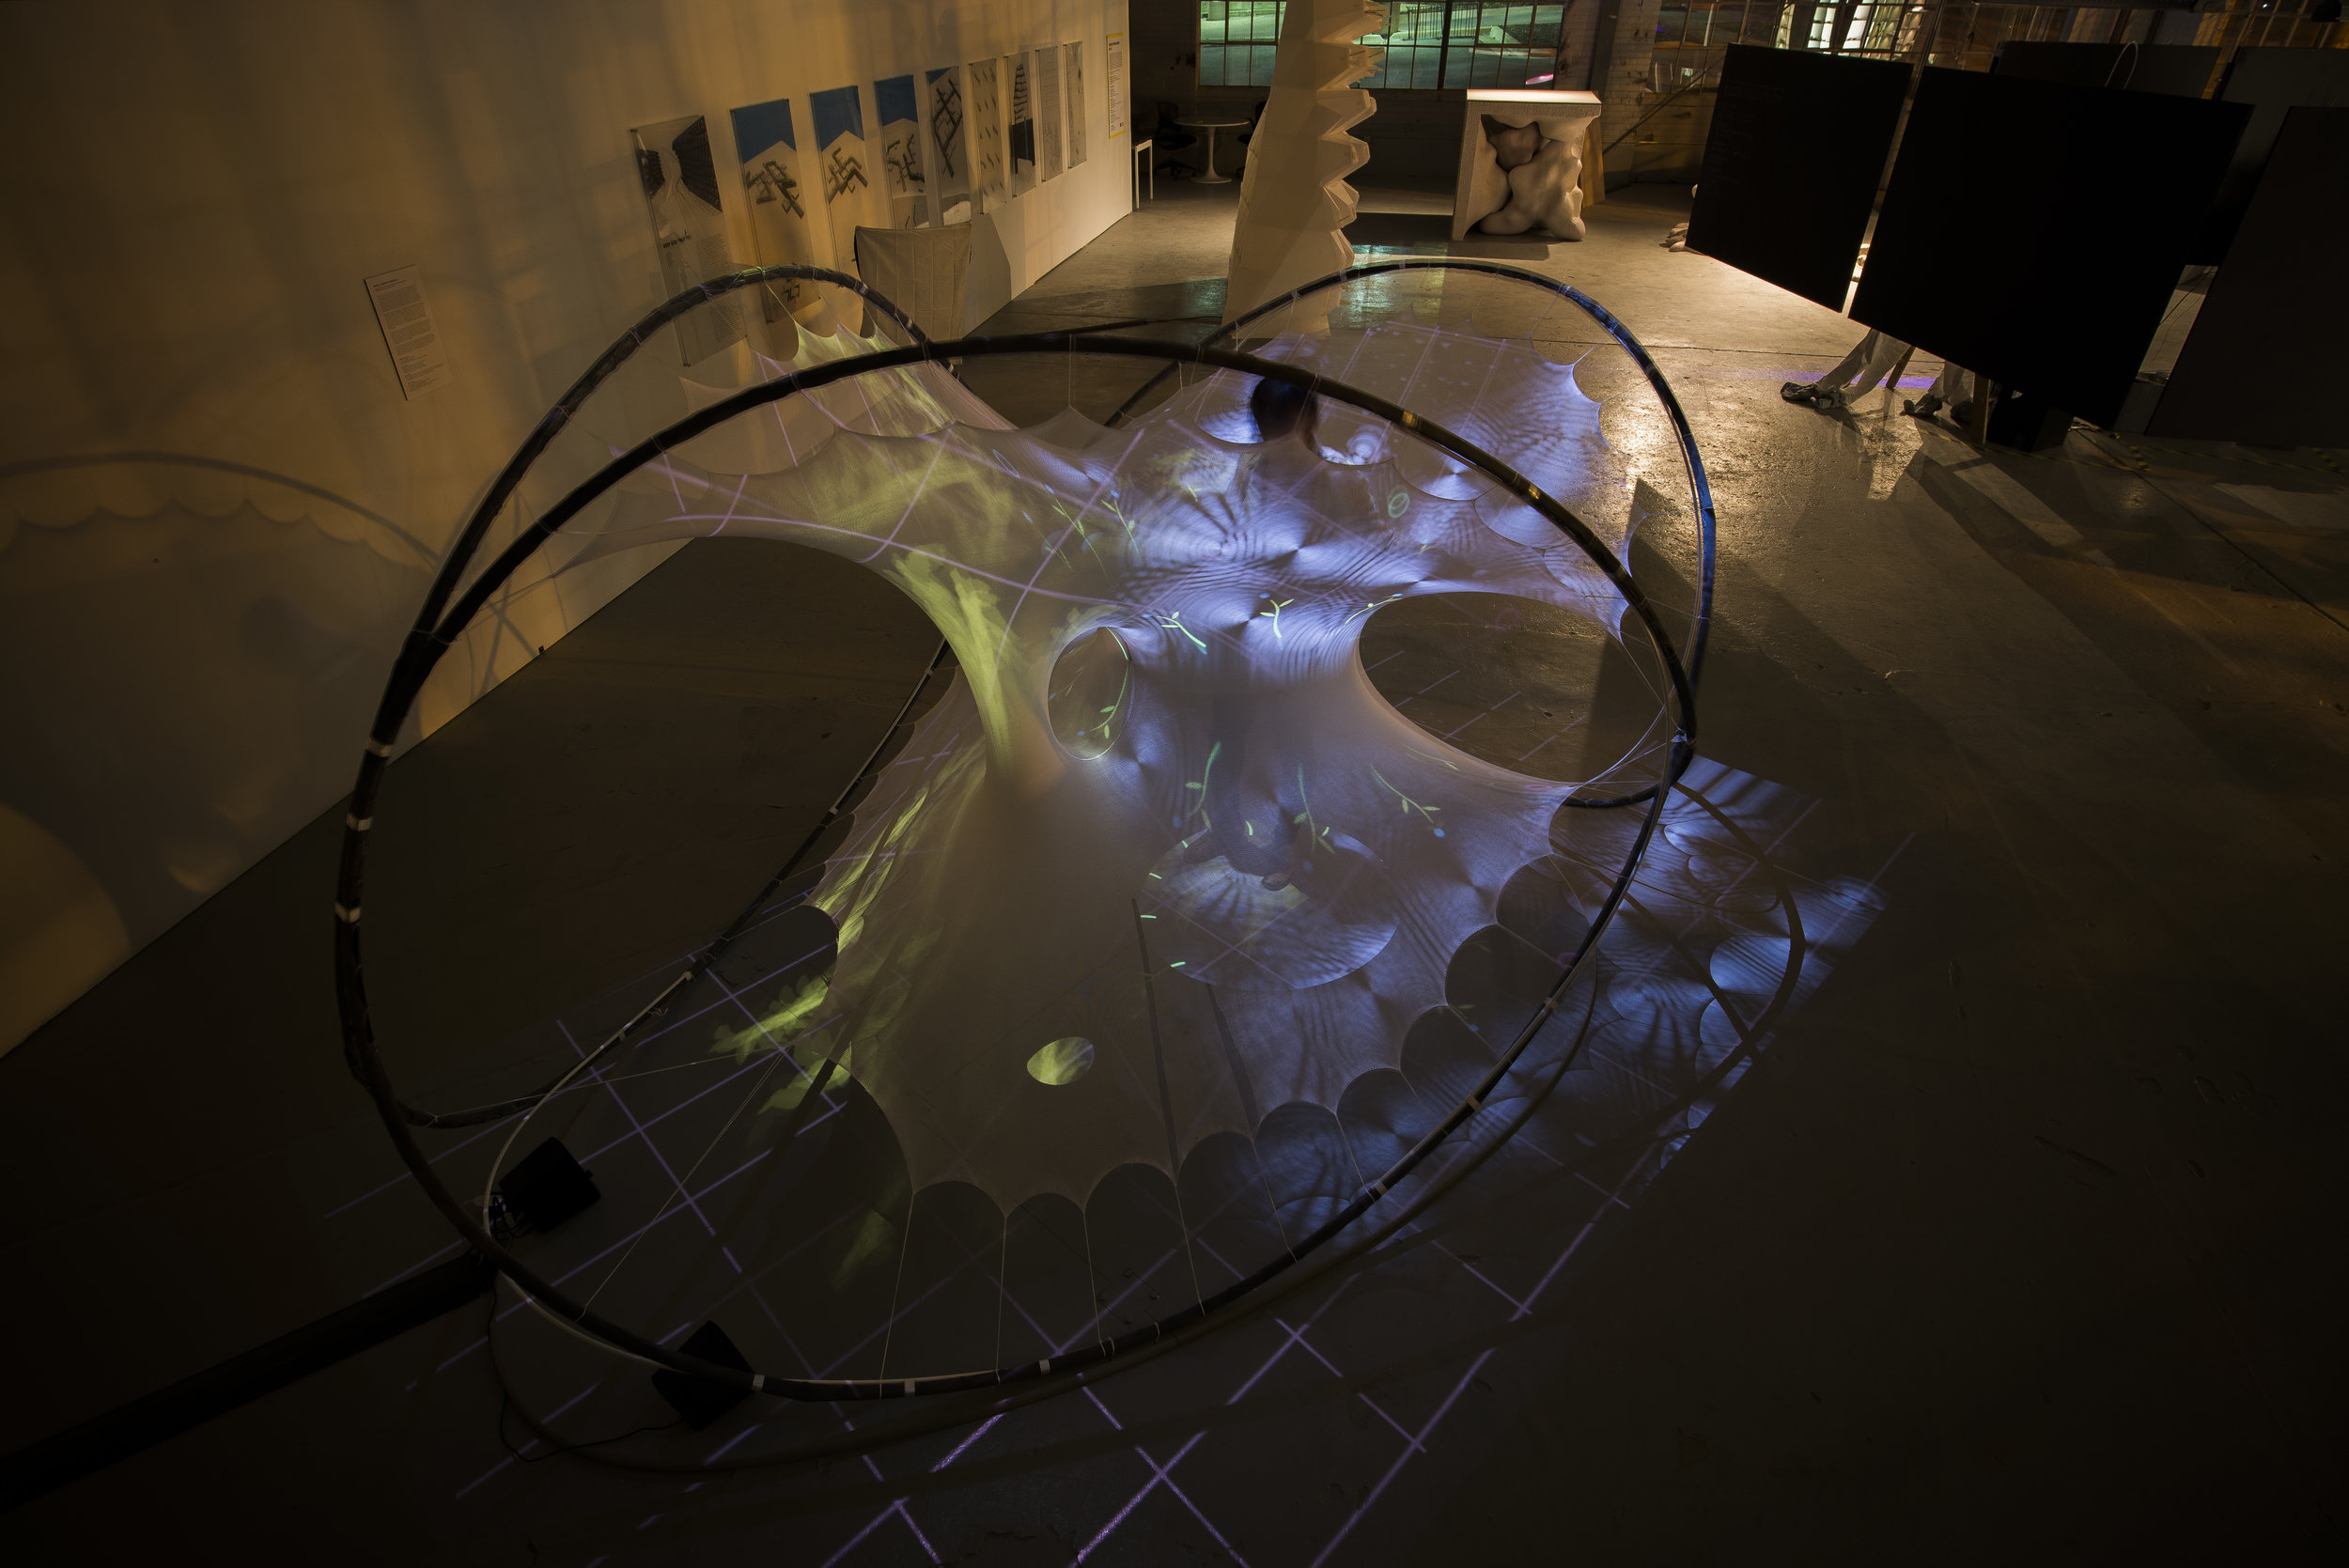 sensoryPLAYSCAPE | stretchANIMATE at Research Through Making Exhibition